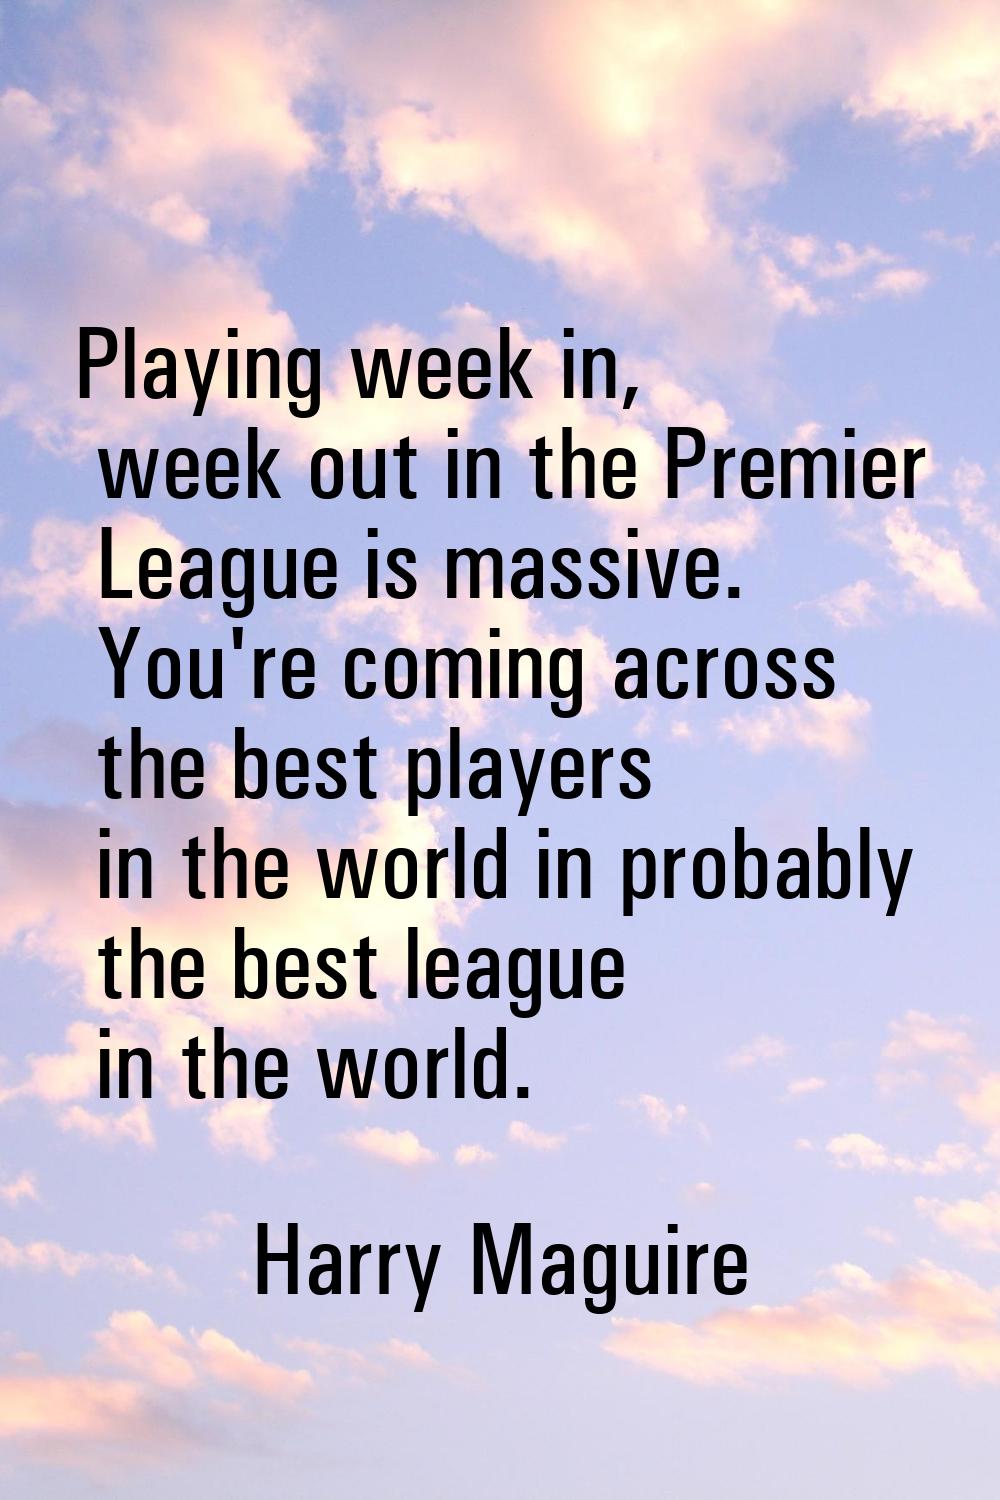 Playing week in, week out in the Premier League is massive. You're coming across the best players i